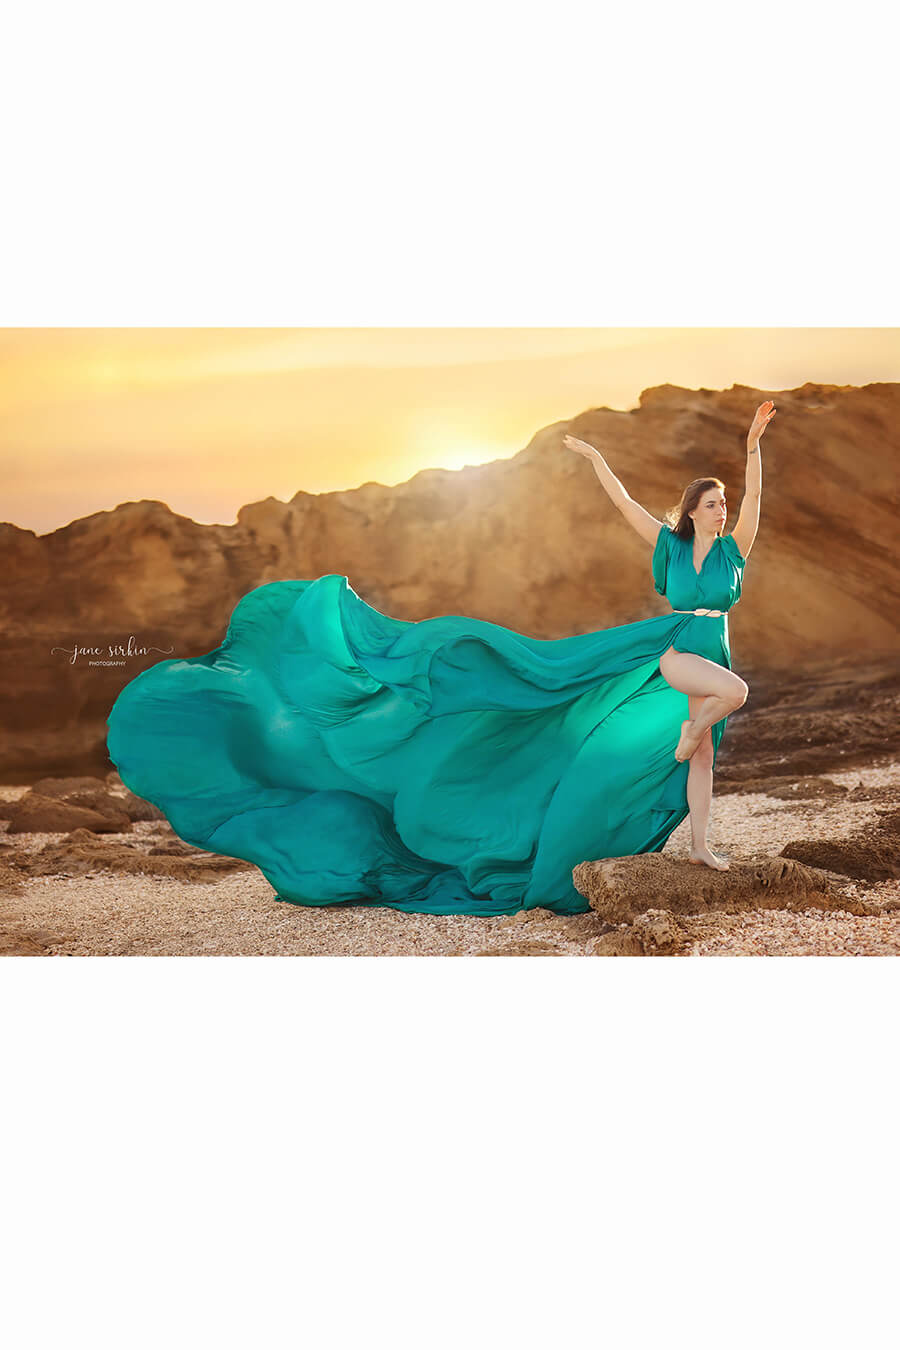 brunette model poses outdoors at a rocky place wearing a emerald silky dress with extra long train to create flying movements.